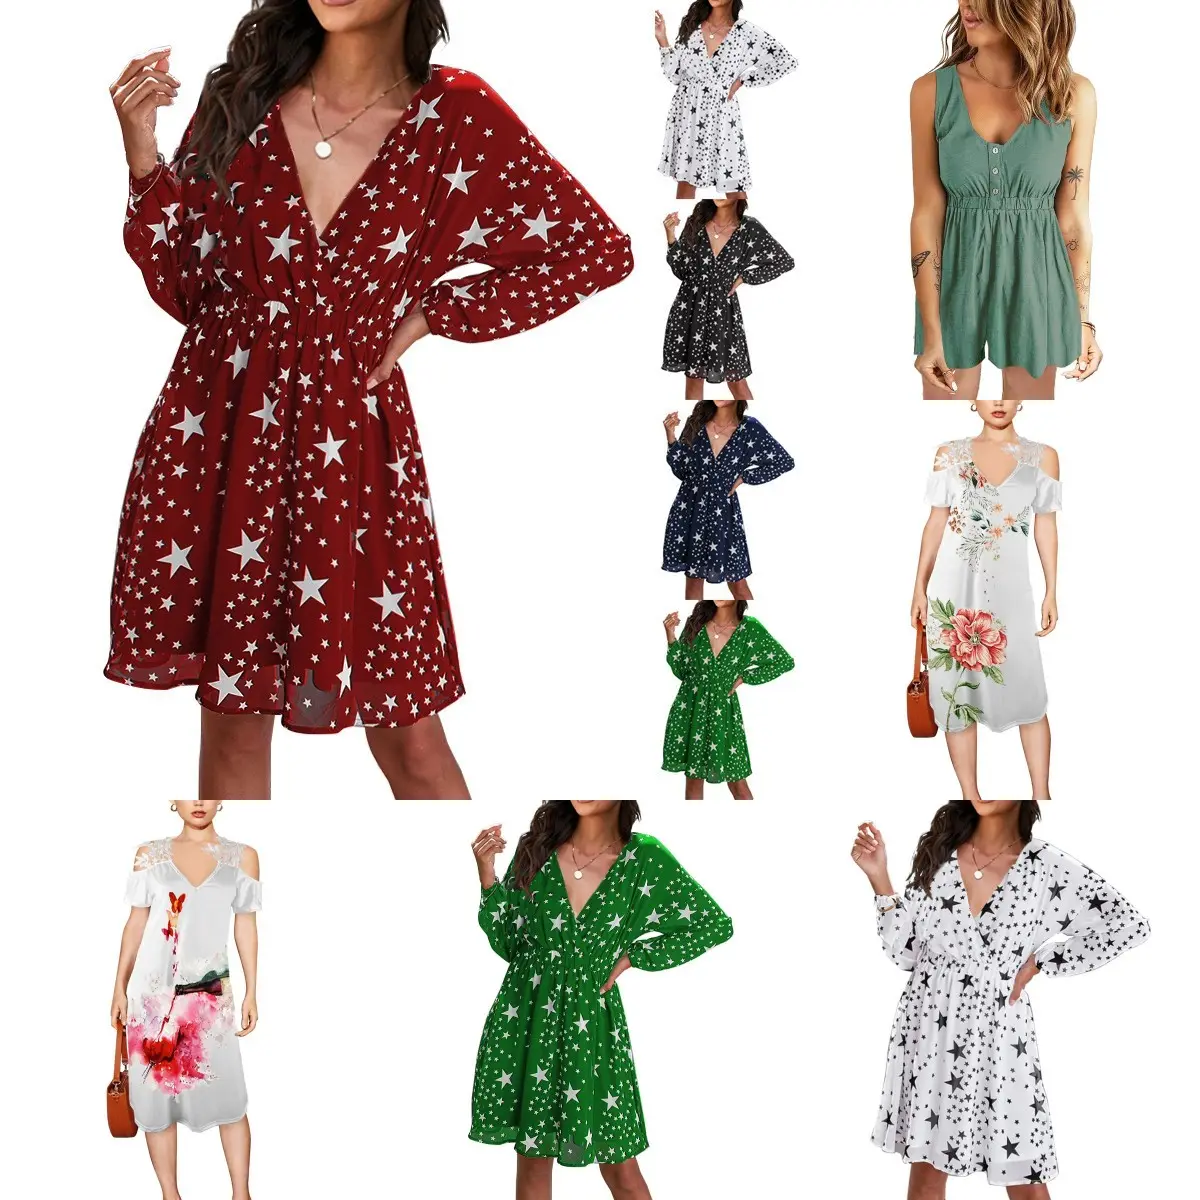 Large loose women's clothes loose summer hot women's fashion short sleeved dresses